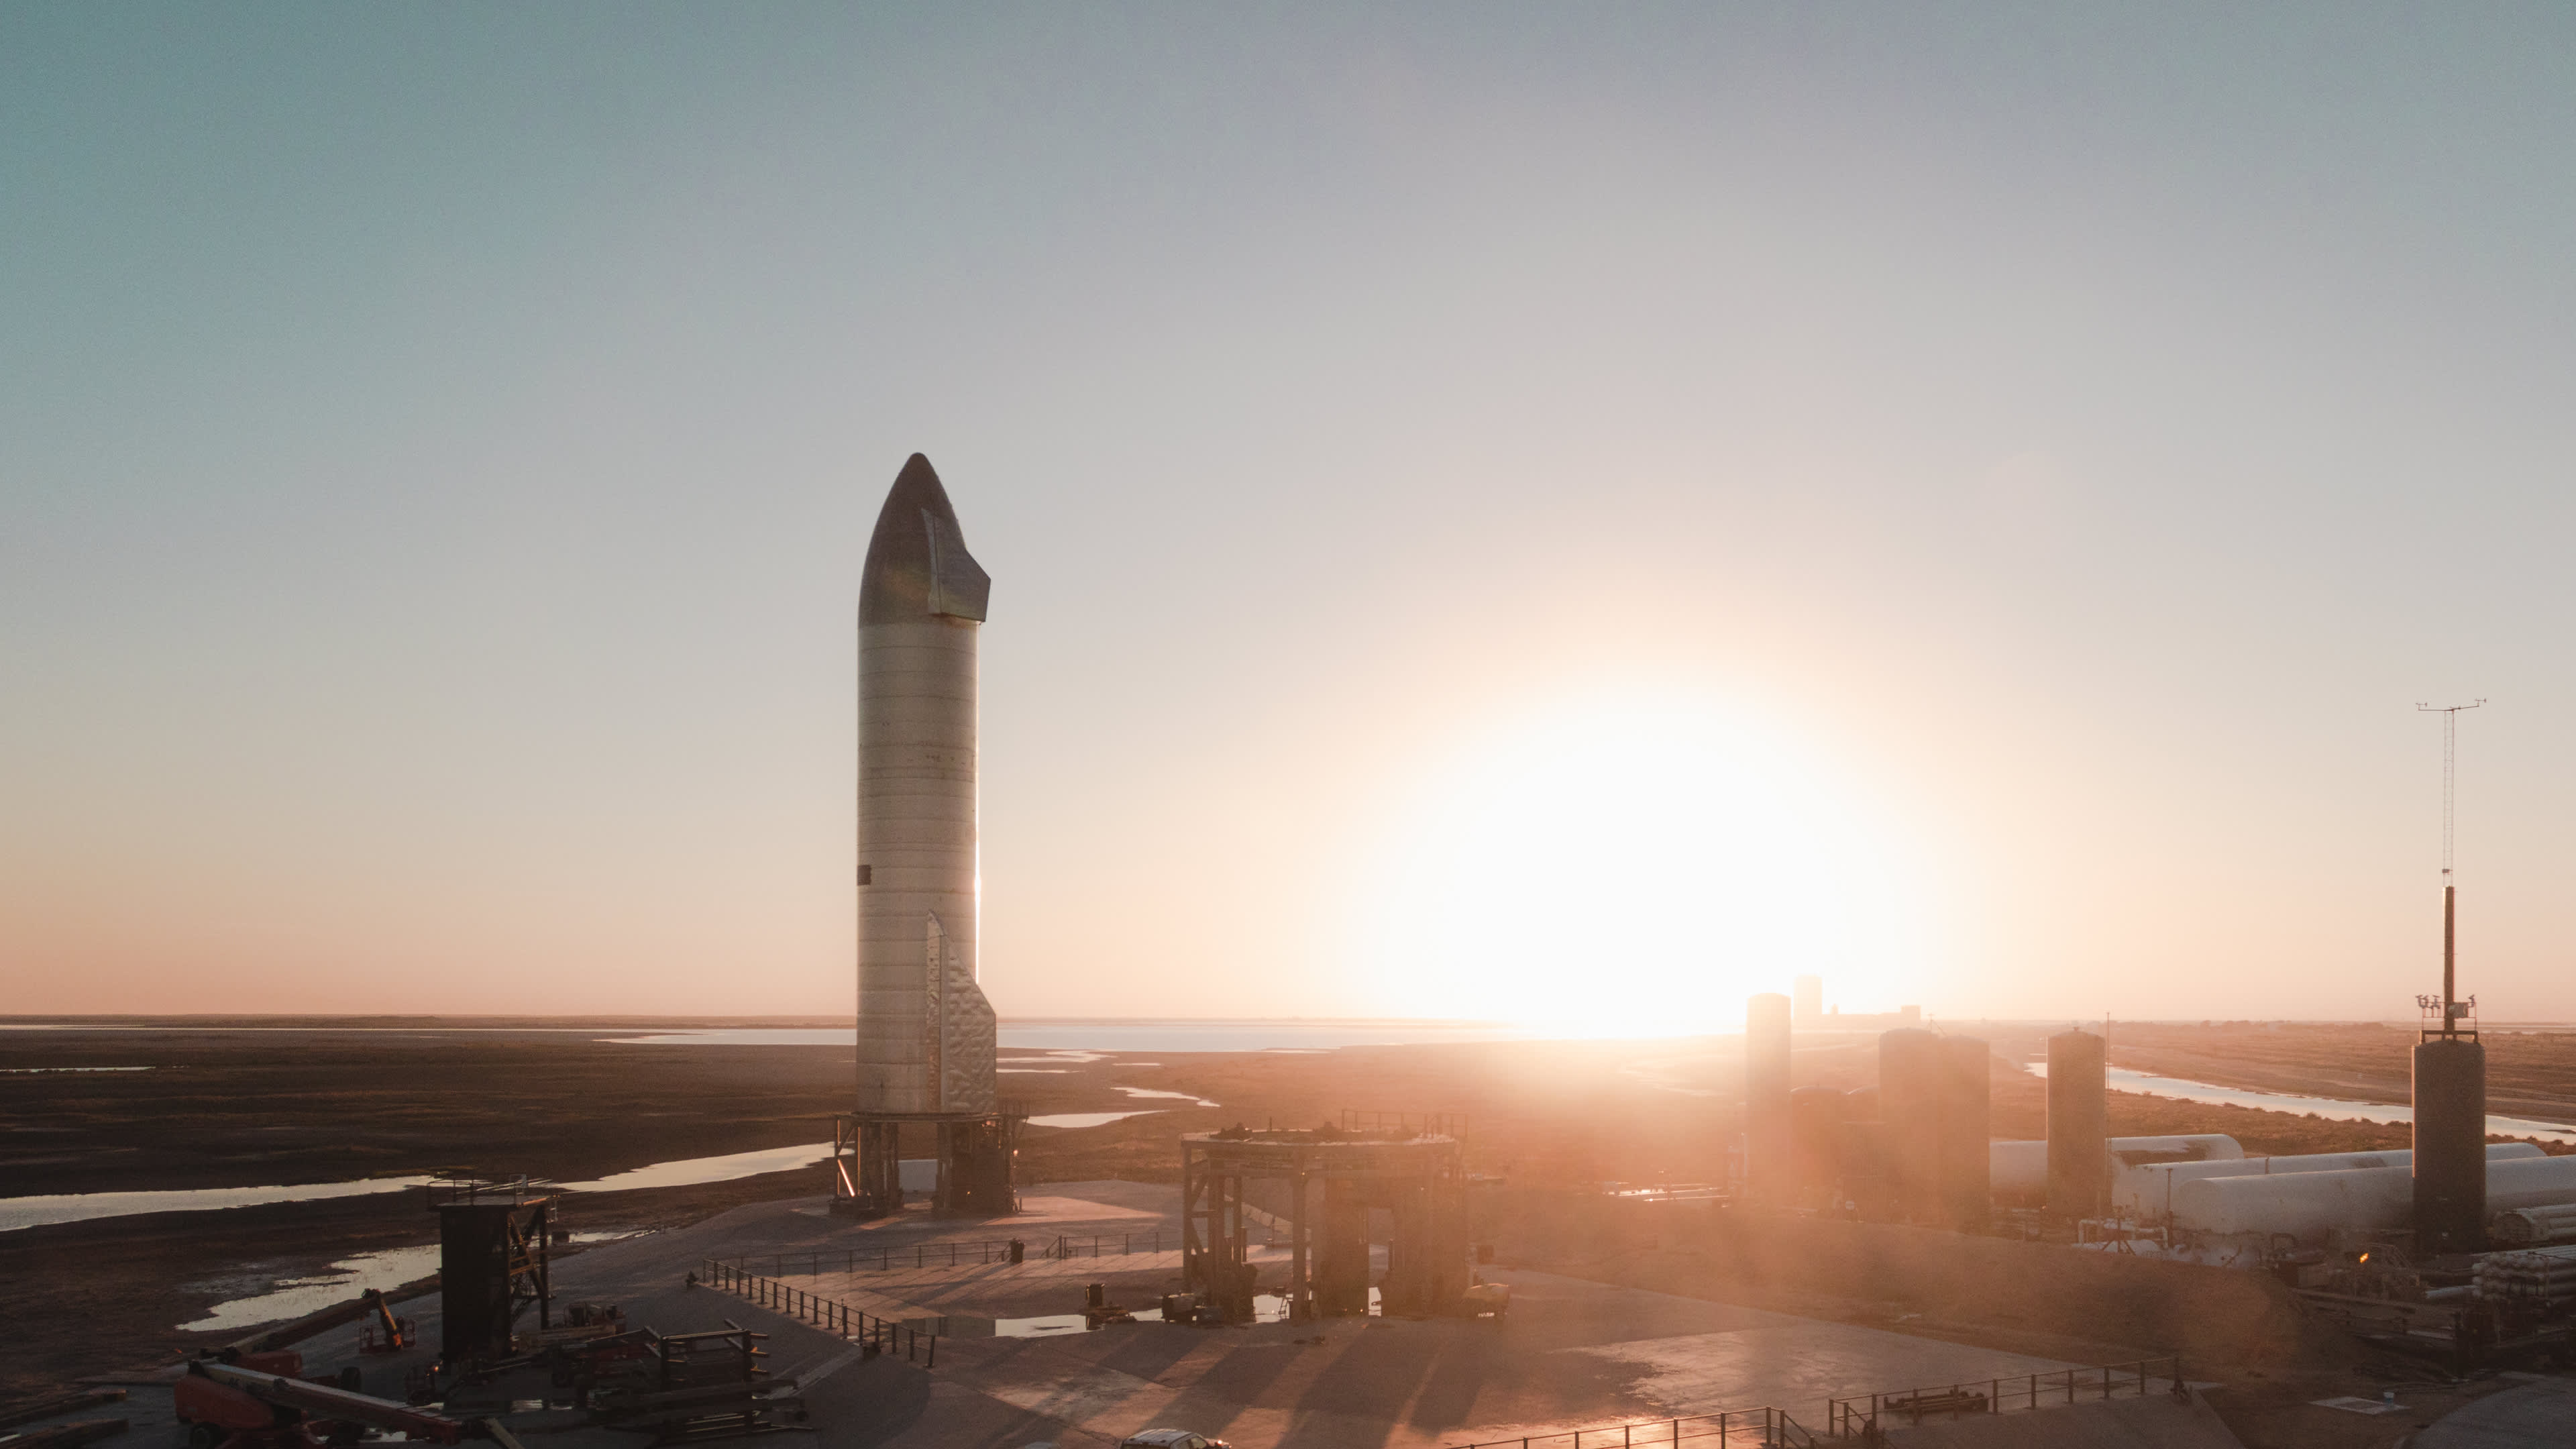 See SpaceX’s attempt to launch and land the SN9 rocket prototype